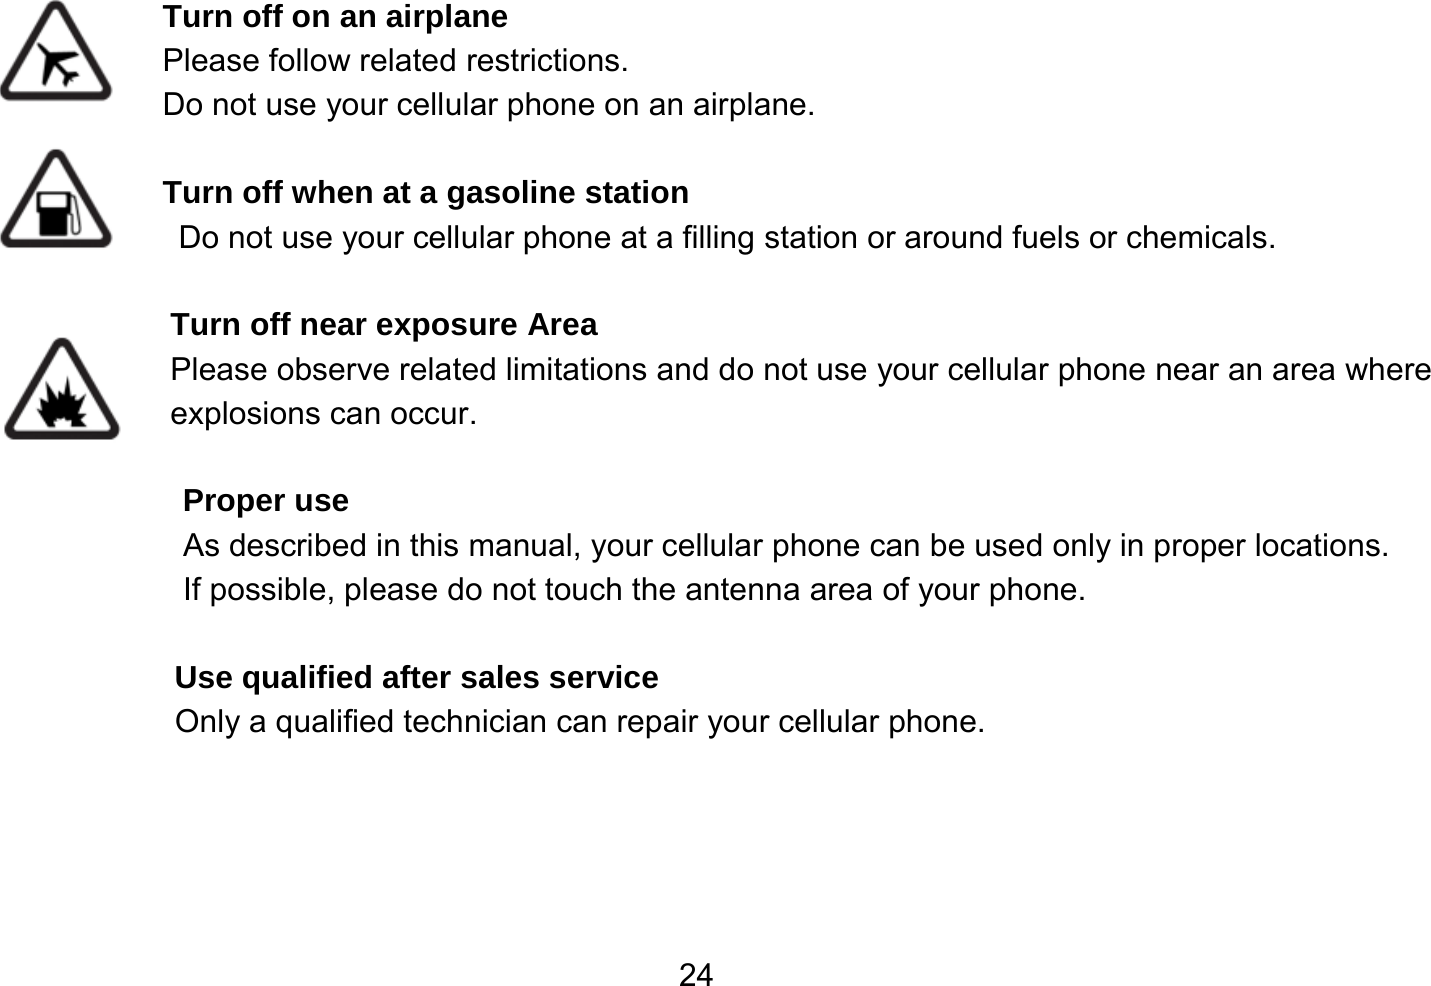   24 Turn off on an airplane Please follow related restrictions. Do not use your cellular phone on an airplane.  Turn off when at a gasoline station Do not use your cellular phone at a filling station or around fuels or chemicals.  Turn off near exposure Area Please observe related limitations and do not use your cellular phone near an area where explosions can occur.  Proper use As described in this manual, your cellular phone can be used only in proper locations. If possible, please do not touch the antenna area of your phone.  Use qualified after sales service Only a qualified technician can repair your cellular phone.     